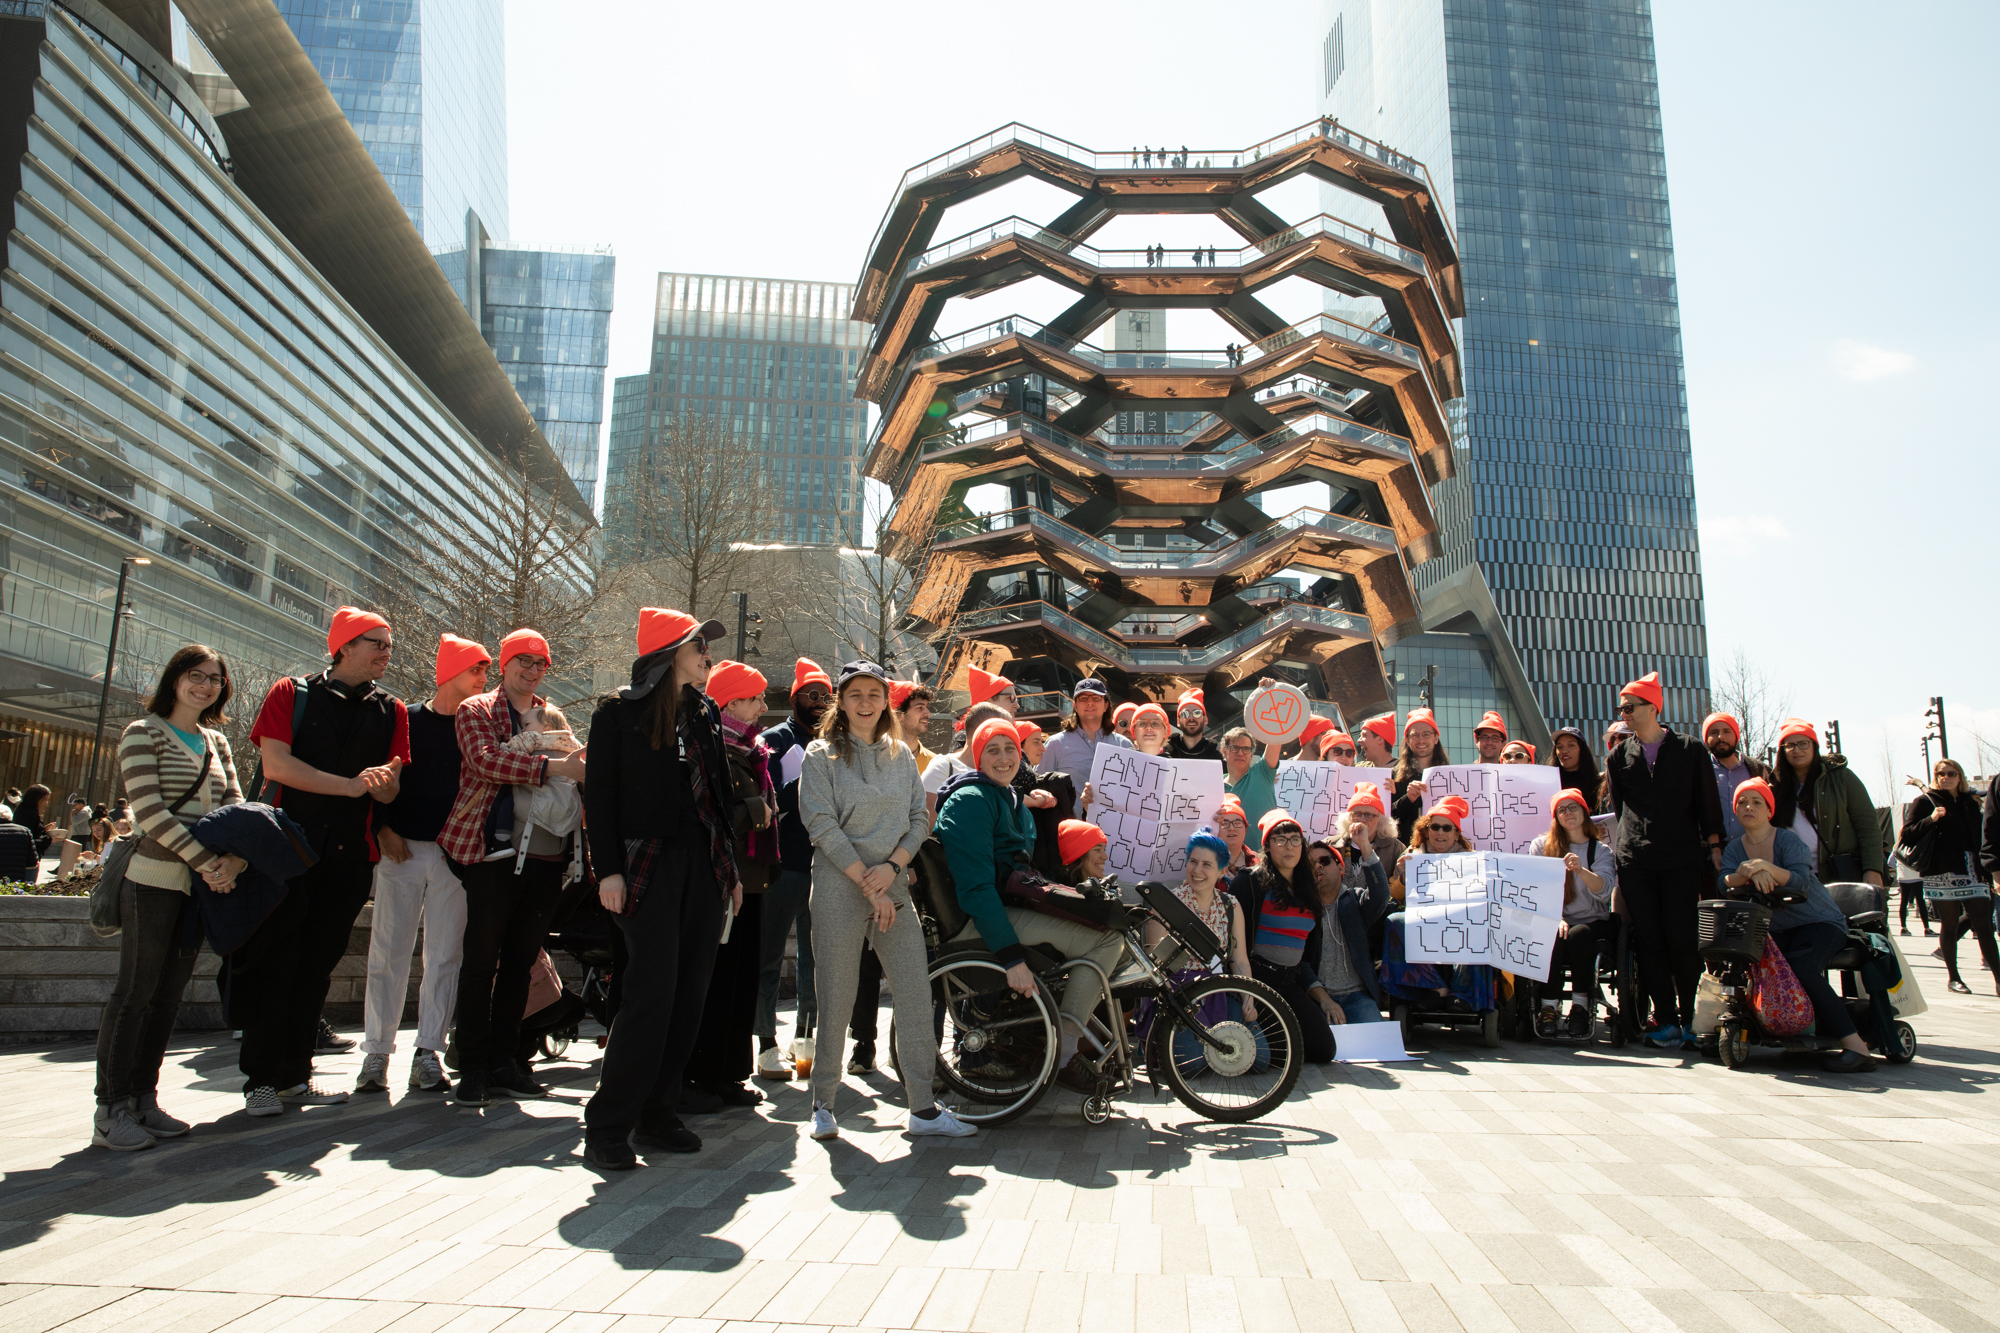 A group photo of people at Hudson Yards in Manhattan in front of the ‘Vessel’ — a building-sized, basket-like structure made of 154 interconnected stairways. People in the group are wearing bright orange Anti-Stairs Club Lounge beanies and holding Anti-Stairs Club Lounge signs.